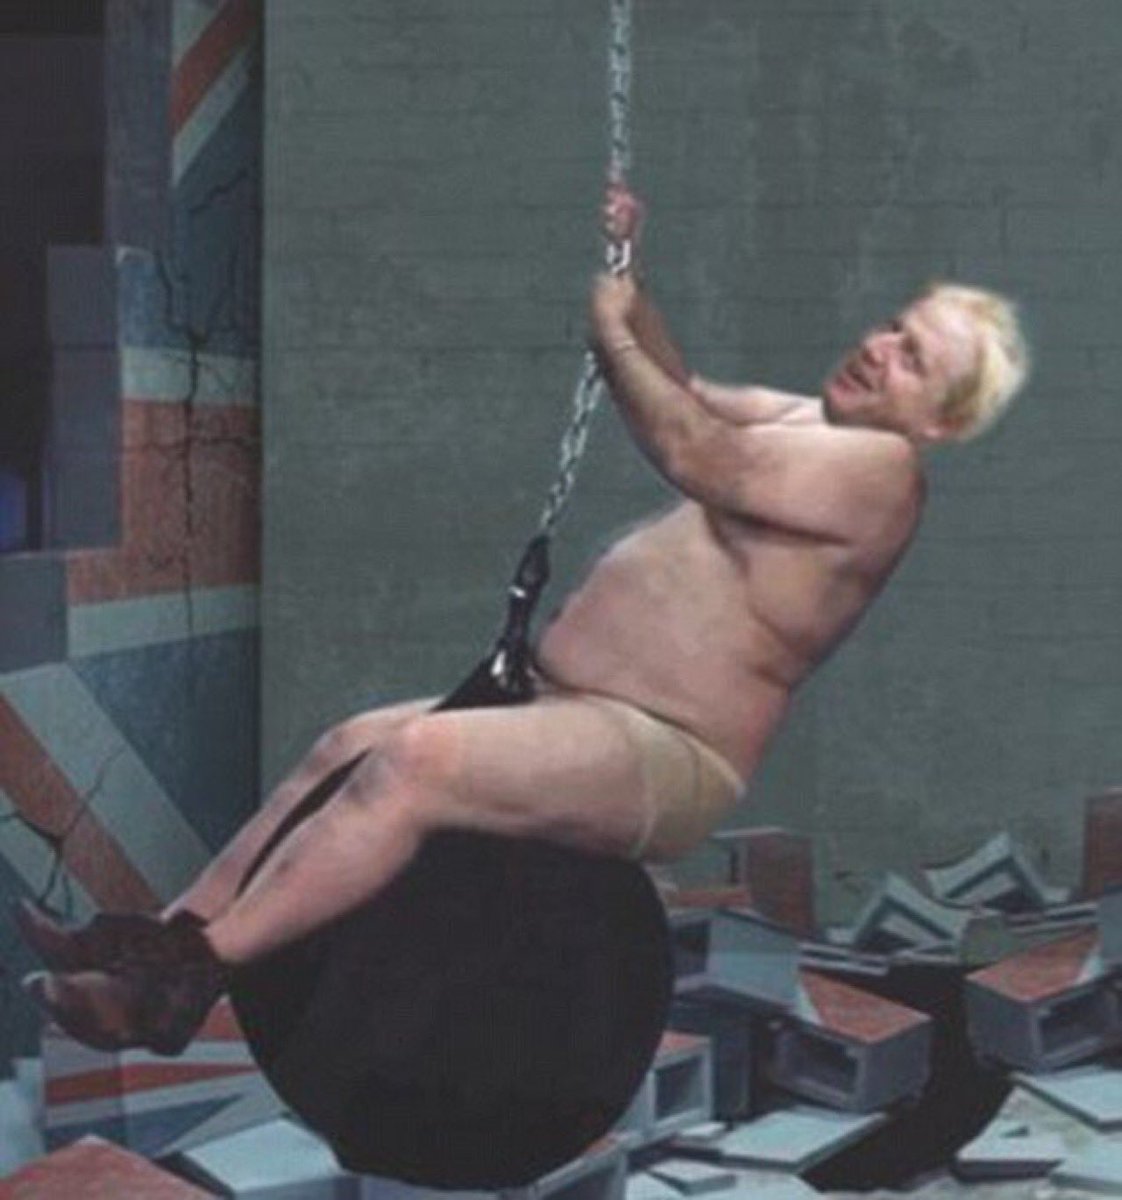 @SueSuezep ‘I came in like a wrecking ball
Yeah, I just closed my eyes and swung
Left you crashing in a blazing fall
All I ever did was wreck you...
Yeah, I, I wreck you, UK...’ 🎶
#LiarJohnson #PutinsPuppet